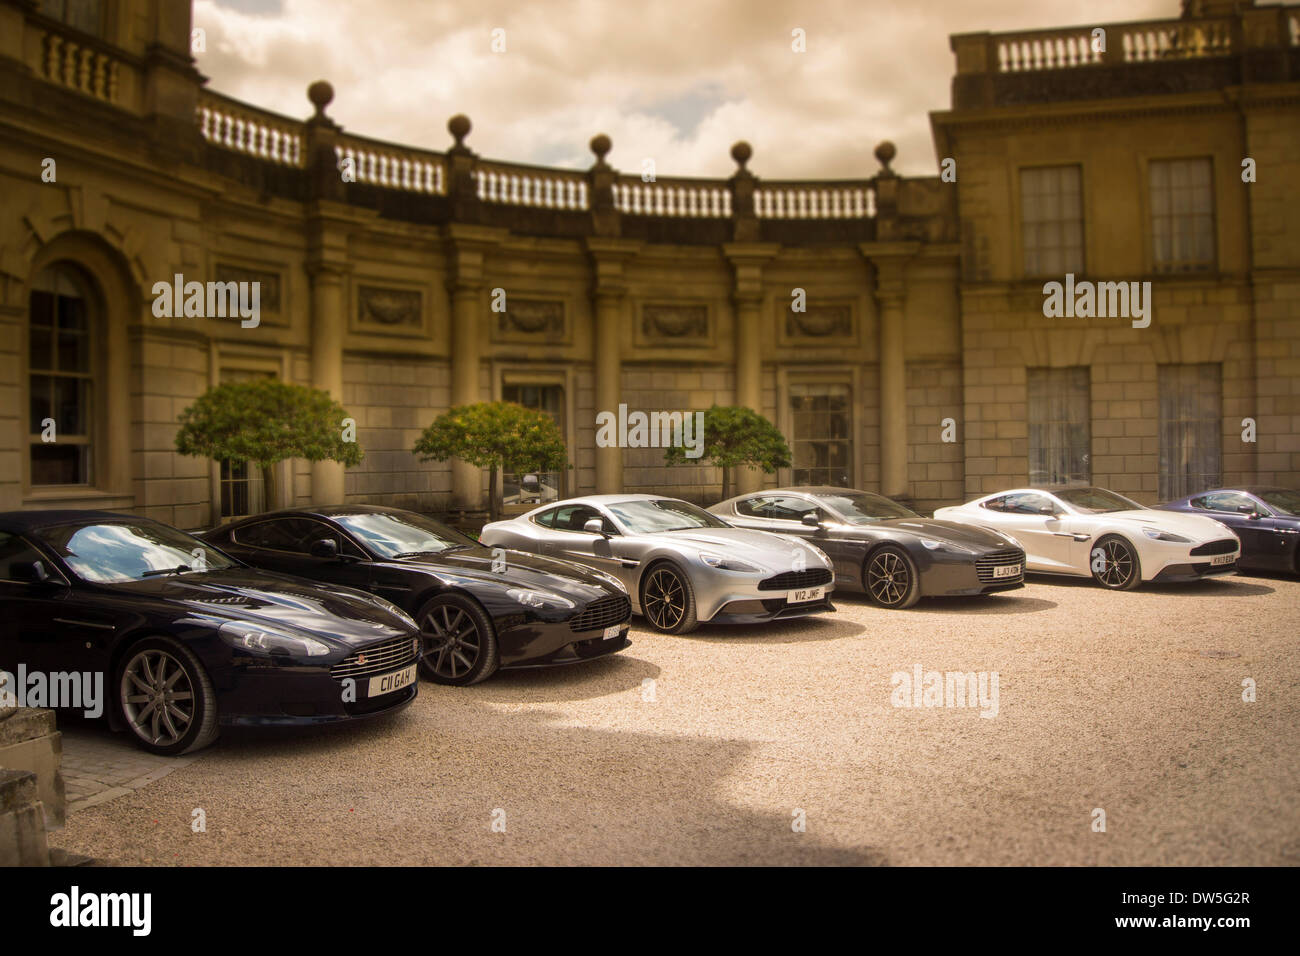 Aston Martins parked in front of a luxury hotel, Cliveden House, Berkshire, United Kingdom, Europe Stock Photo